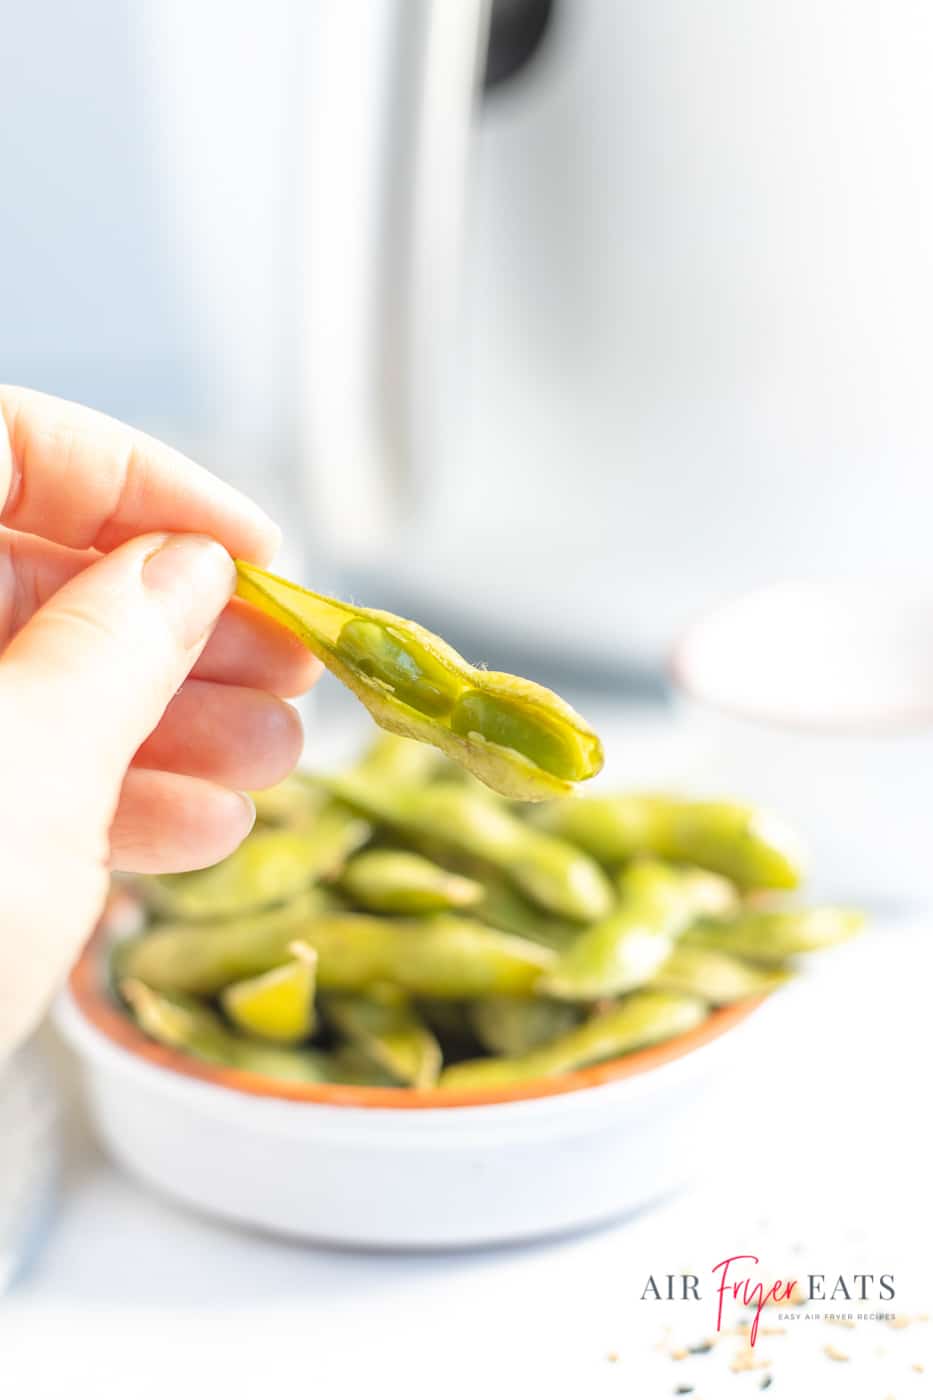 A vertical photo of a white dish containing air fried edamame. In the background is a white air fryer, and just to the left is a hand holding a partially split edamame pod. To the bottom right of the image is the company logo